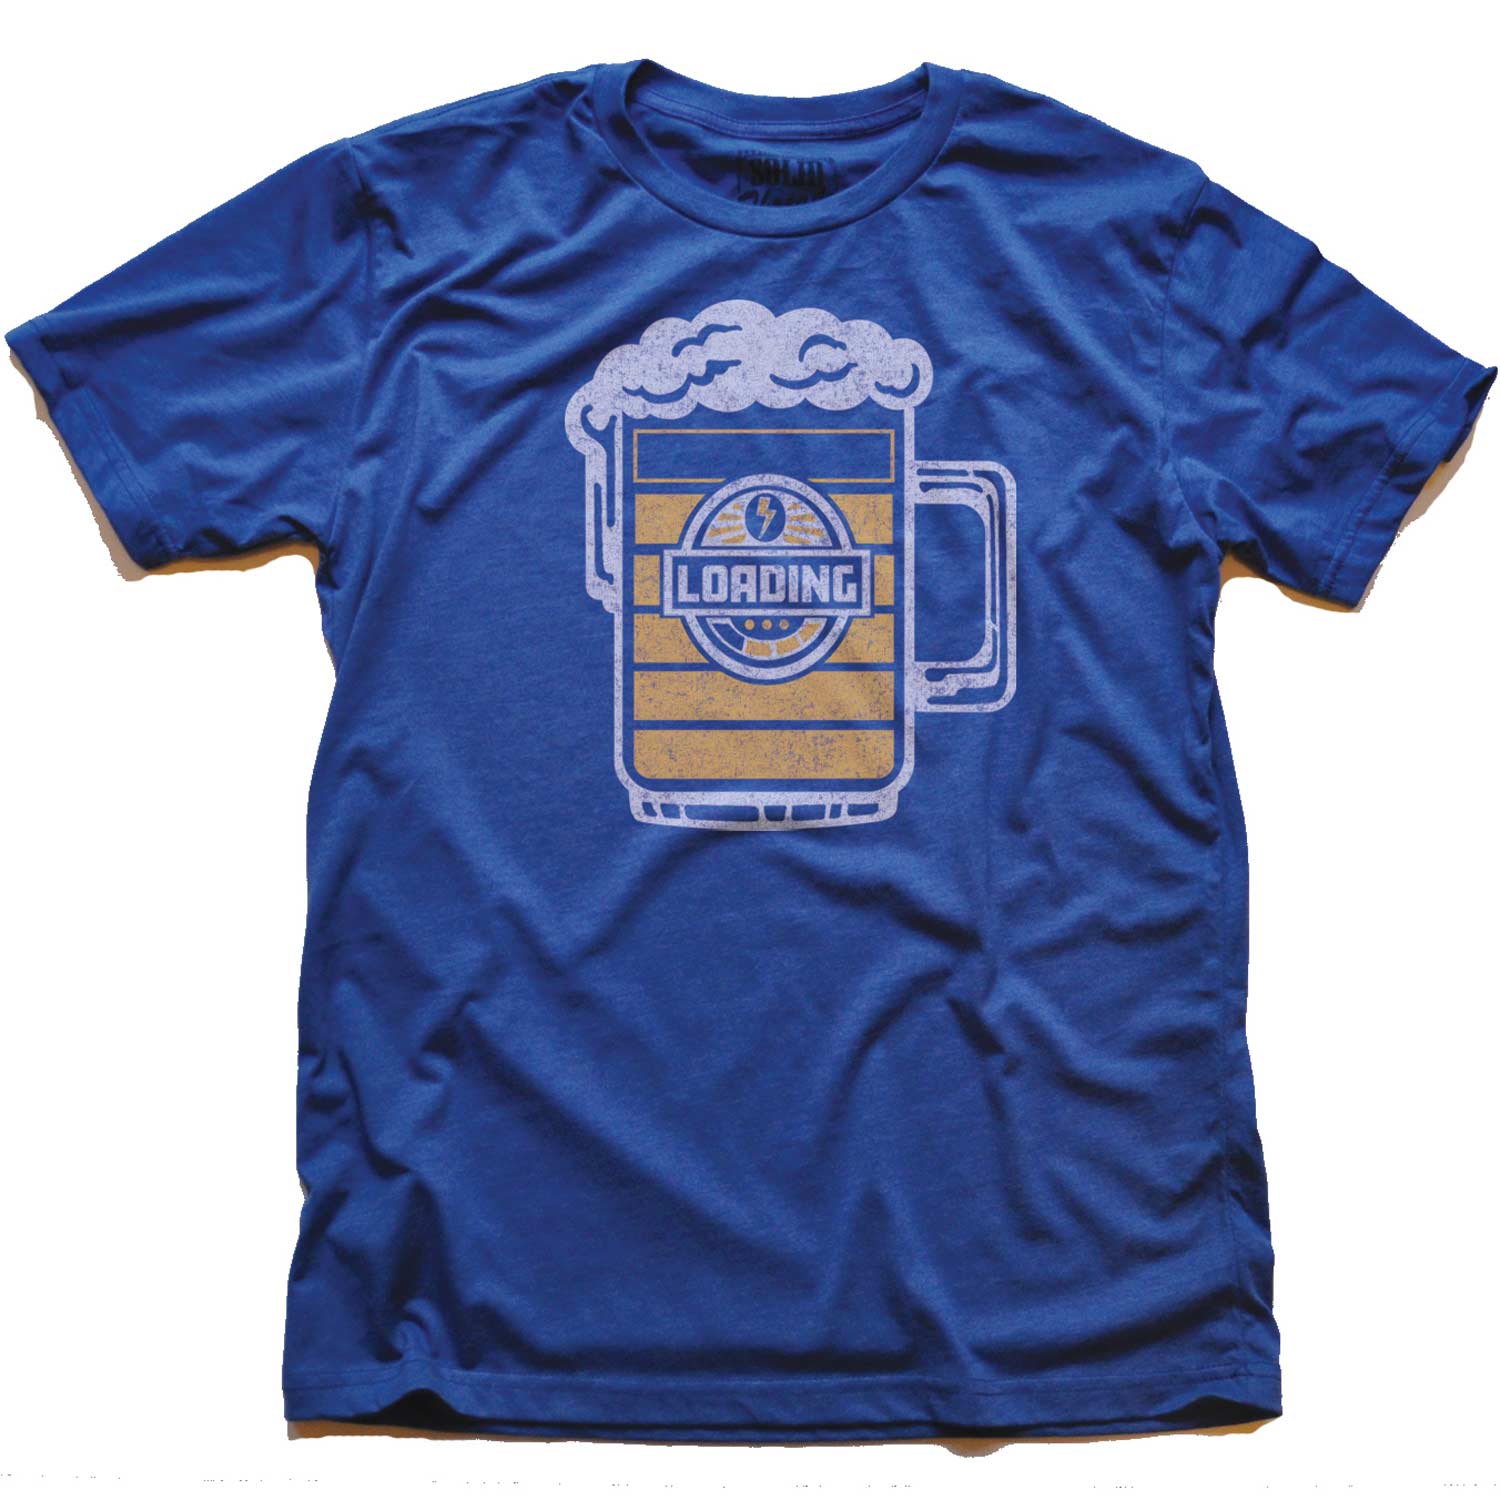 Men's Beer Loading Vintage Inspired T-shirt | Cool Retro Tee with Funny Drinking Graphic | Solid Threads